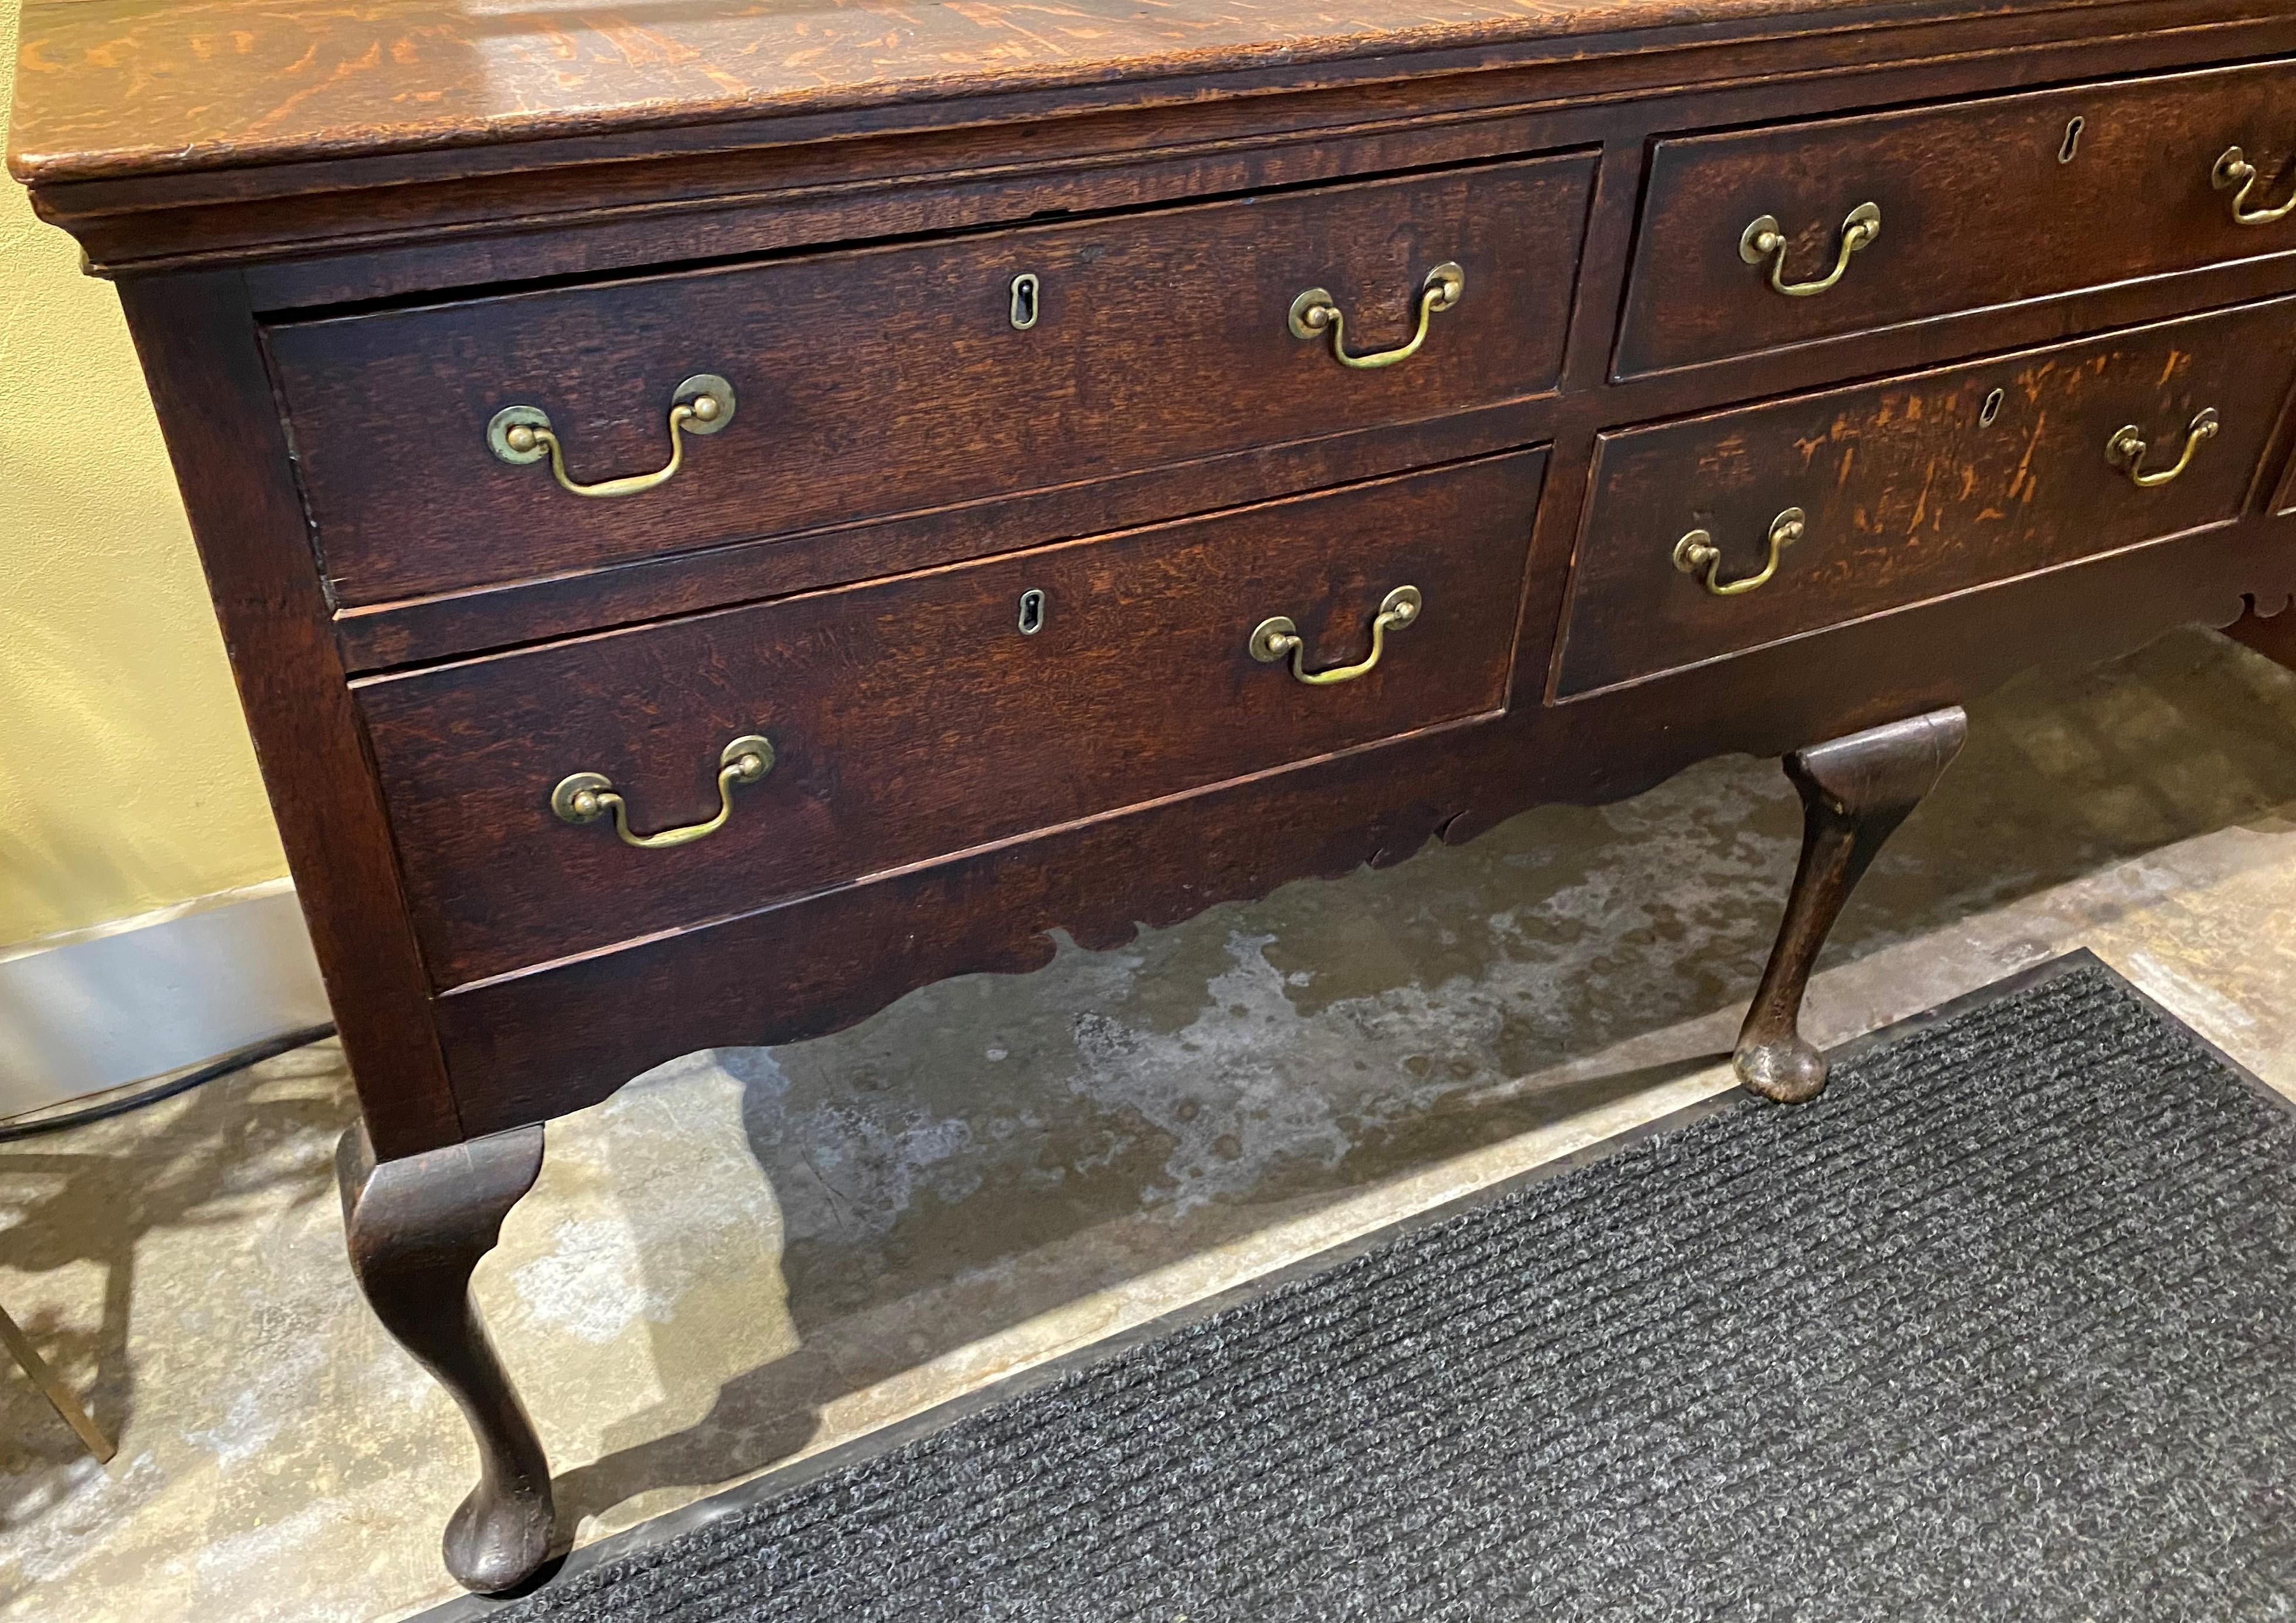 A fine Welsh oak dresser base or server with a rectangular molded edge top surmounting a case with six fitted drawers, over a shaped skirt, all supported by three front cabriole legs terminating with pad feet, and two rear cabriole shape legs